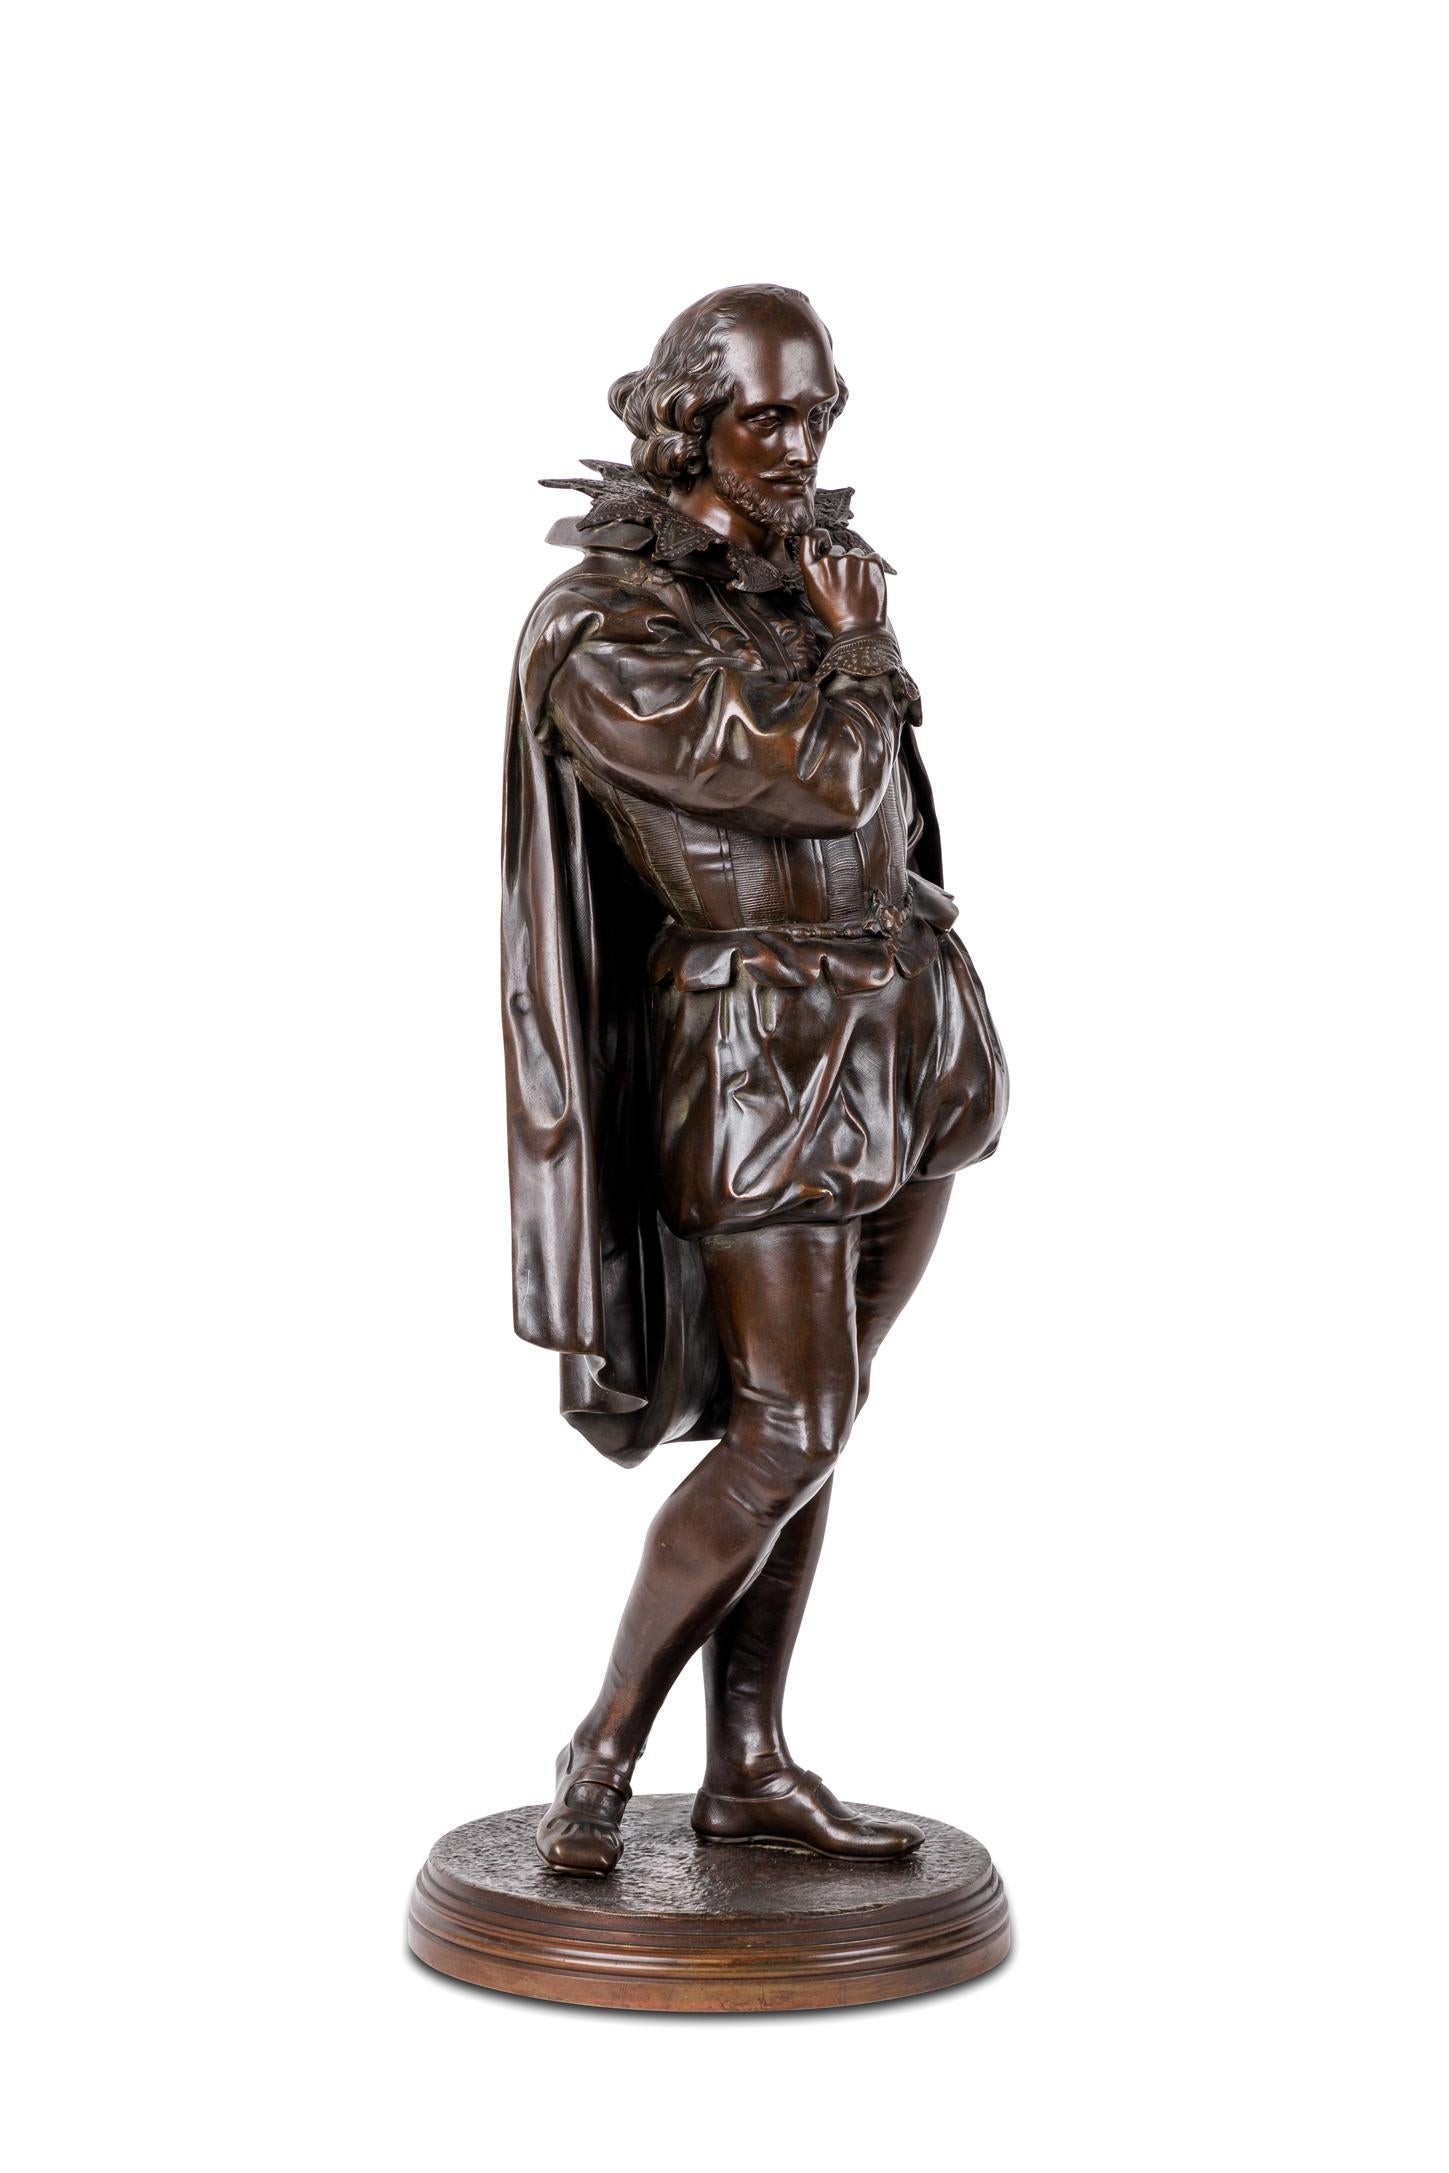 French Jean Jules B. Salmson, A Patinated Bronze Sculpture of William Shakespeare